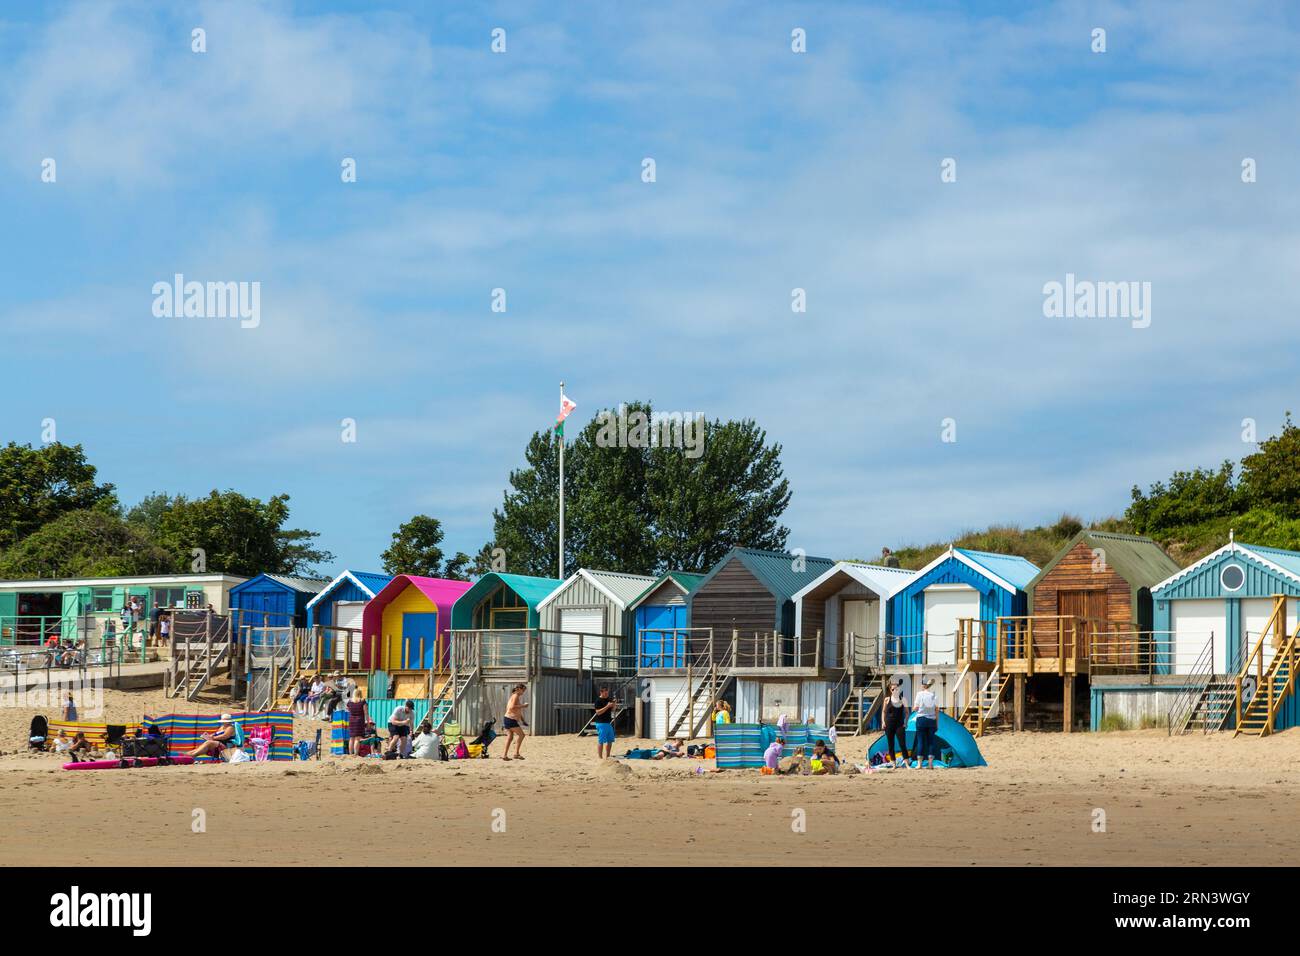 People enjoying a summers day on Abersoch beach. Stock Photo